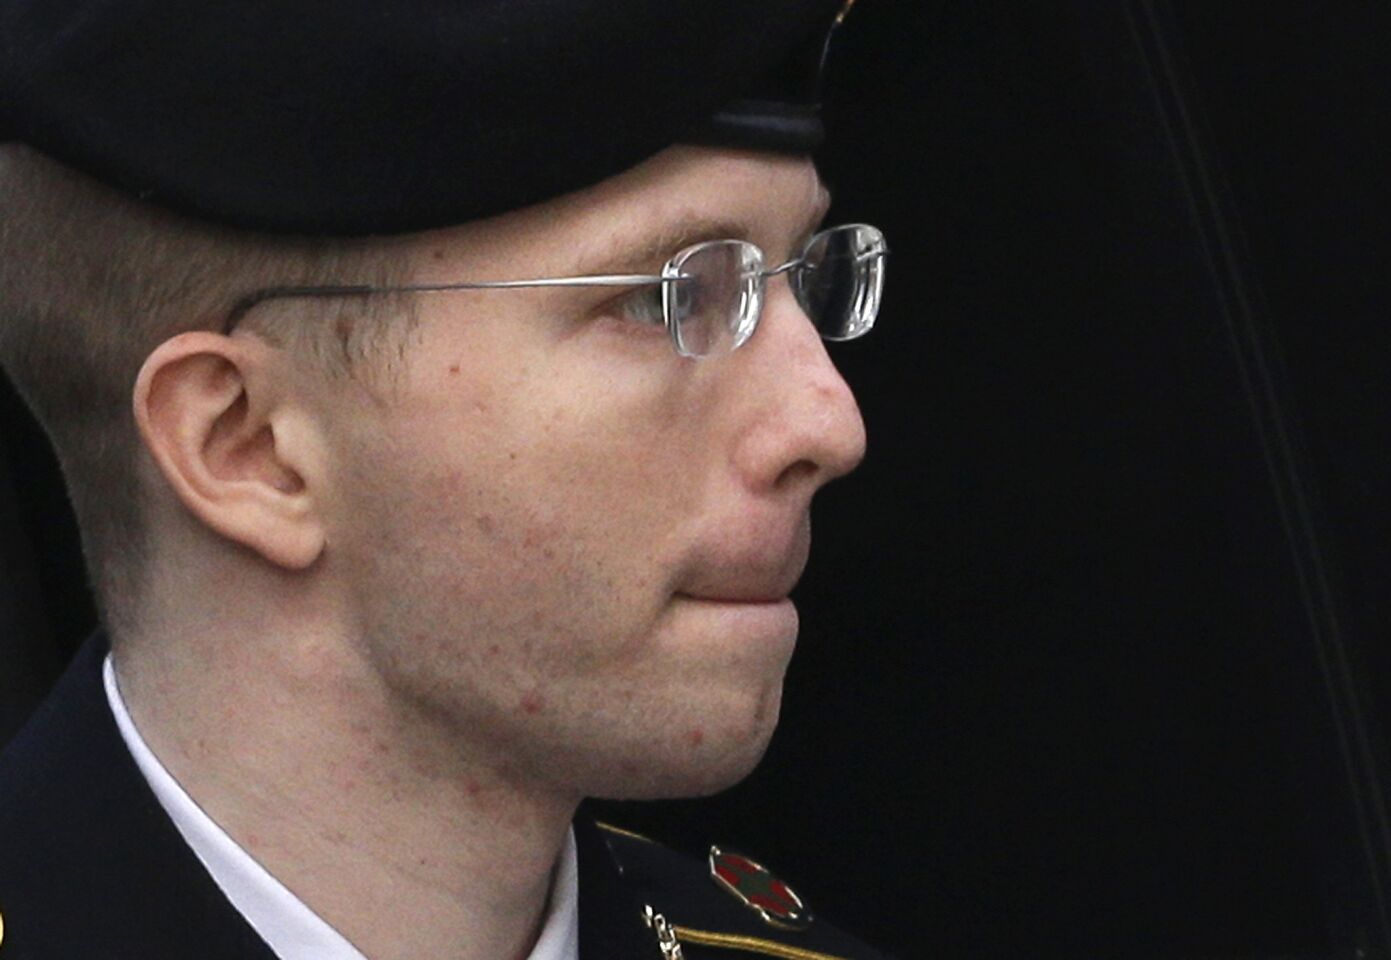 Army Pvt. Bradley Manning is escorted into a courthouse in Fort Meade, Md., before a sentencing hearing in his court martial. After the hearing, Manning announced a desire to be called Chelsea from now on and to be considered a woman.